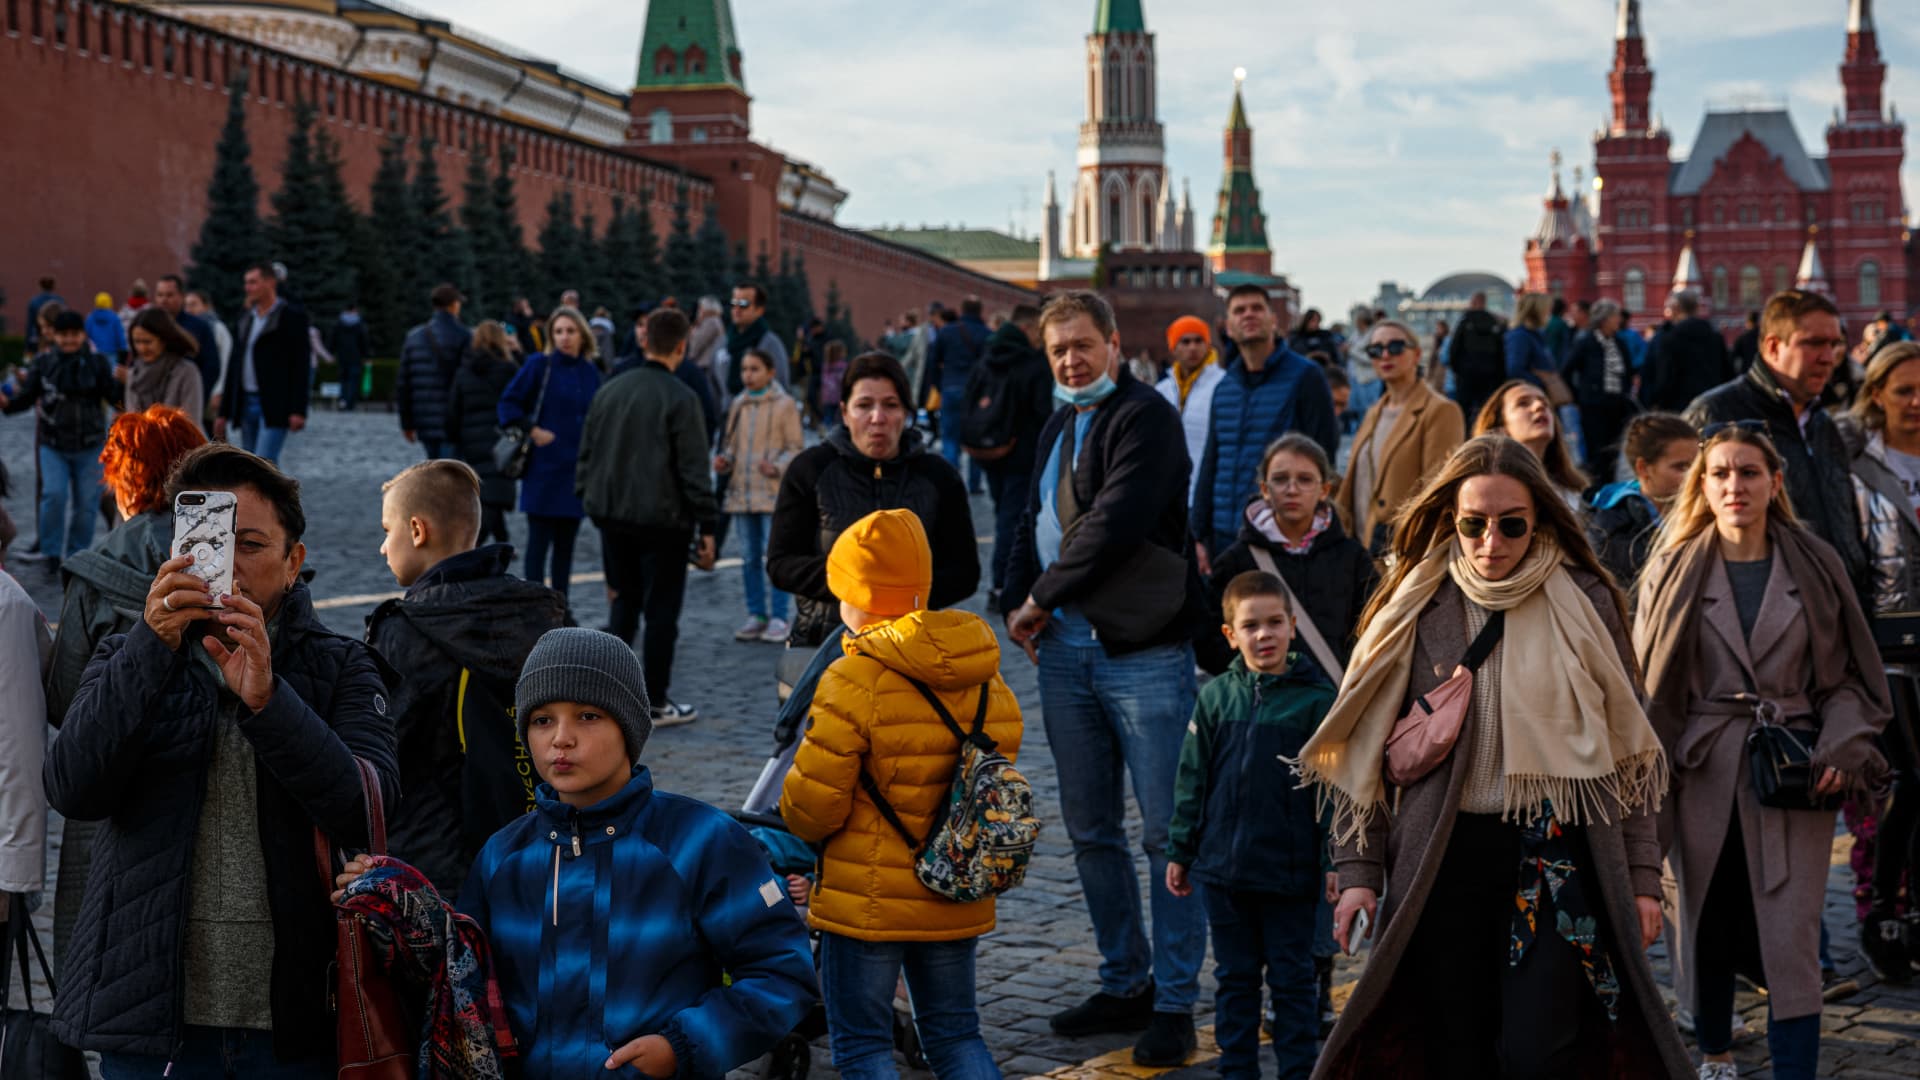 People walk through the Red Square in a sunny autumn day in Moscow on October 9, 2021.